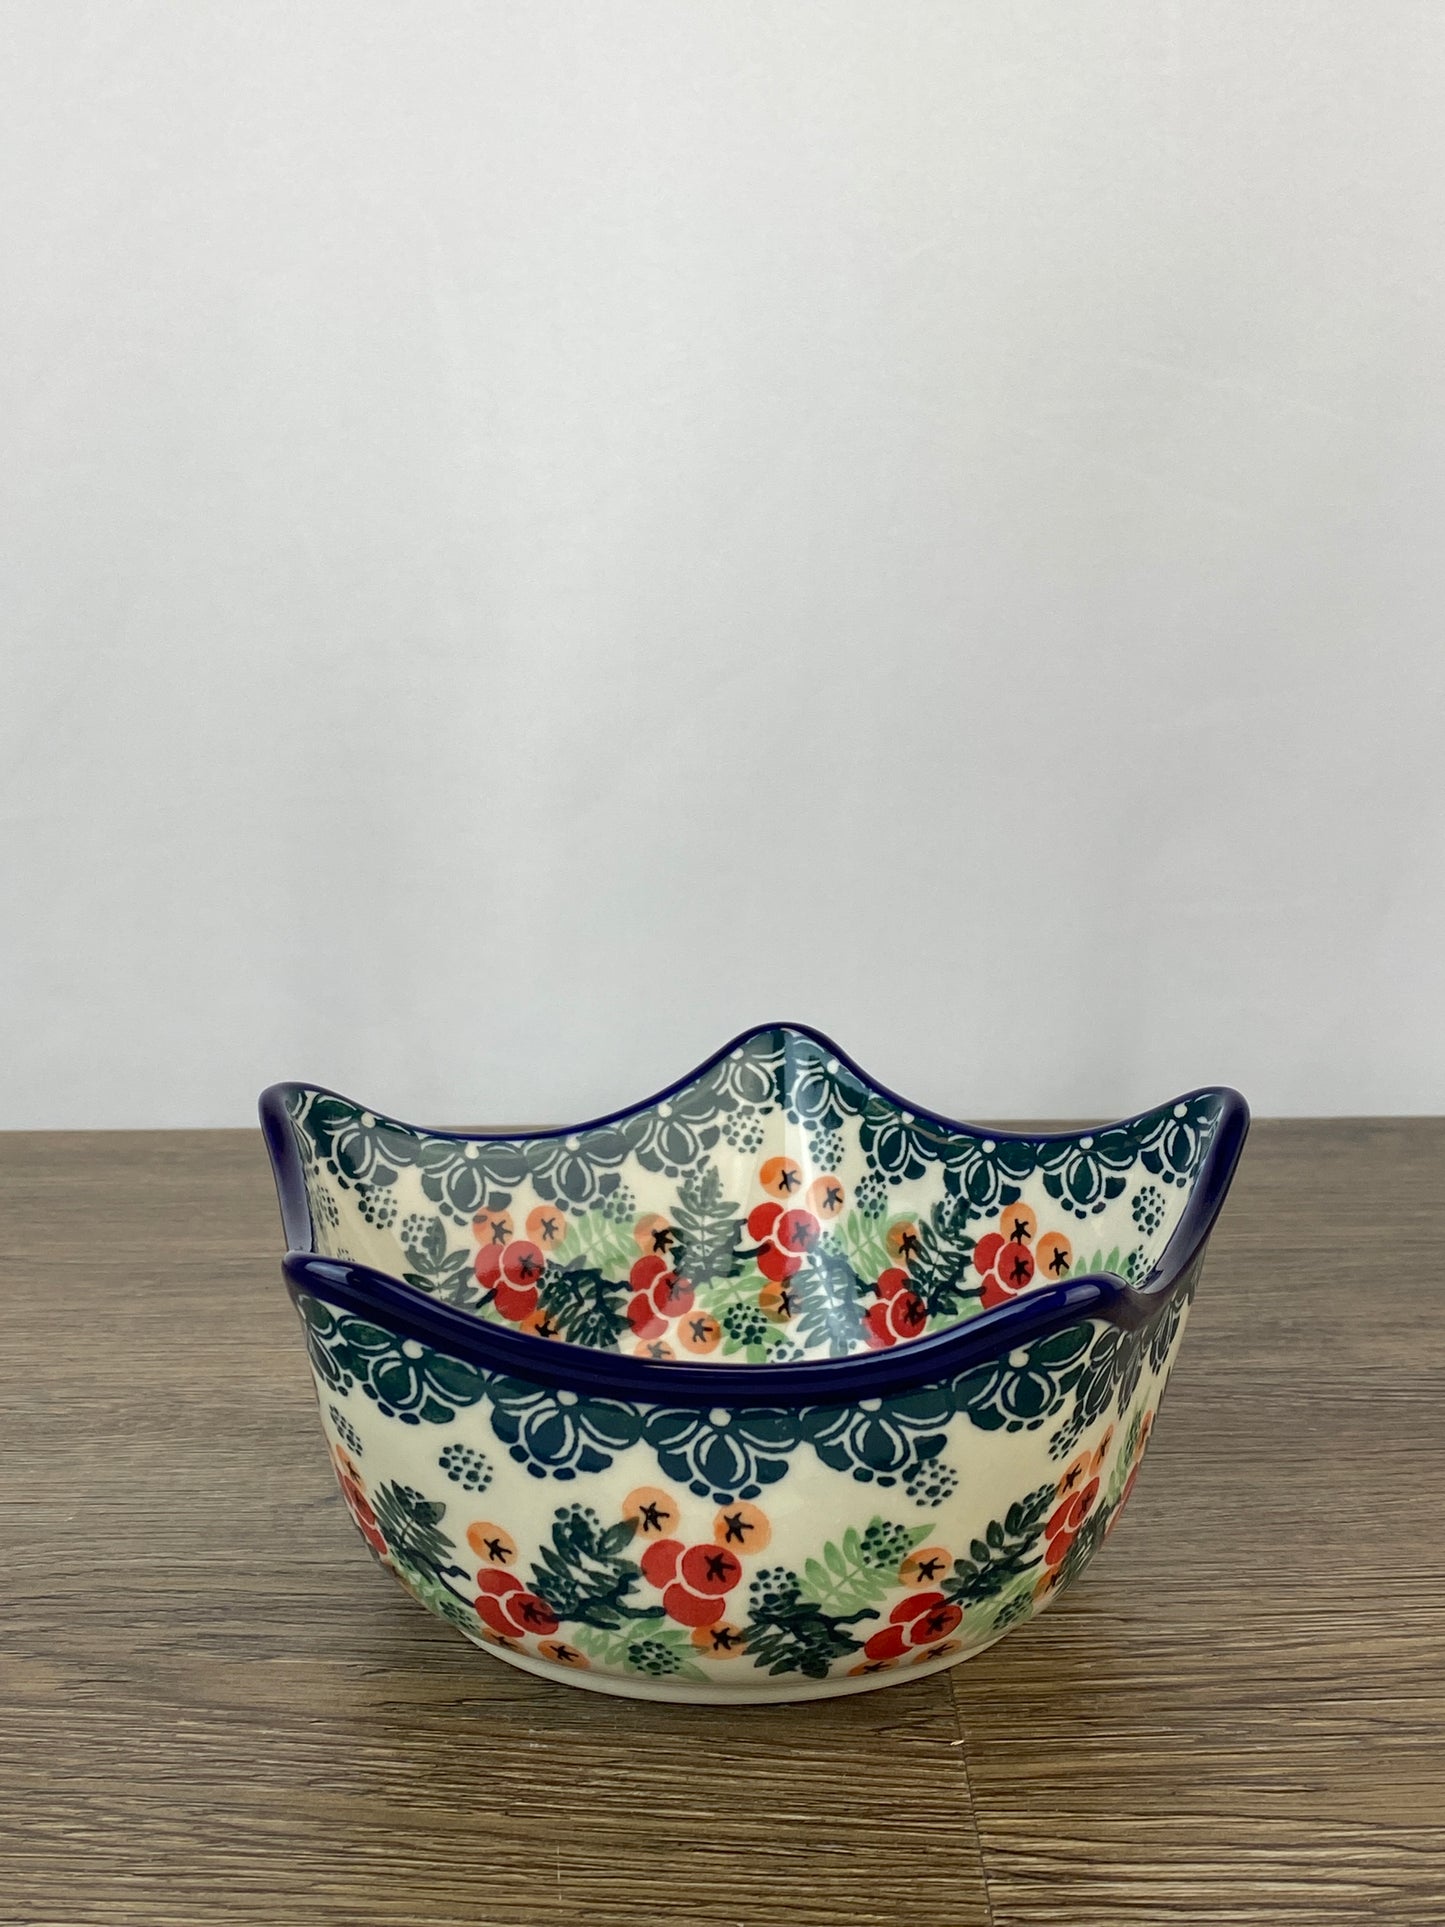 SALE Five Pointed Bowl - Shape 814 - Pattern 1414